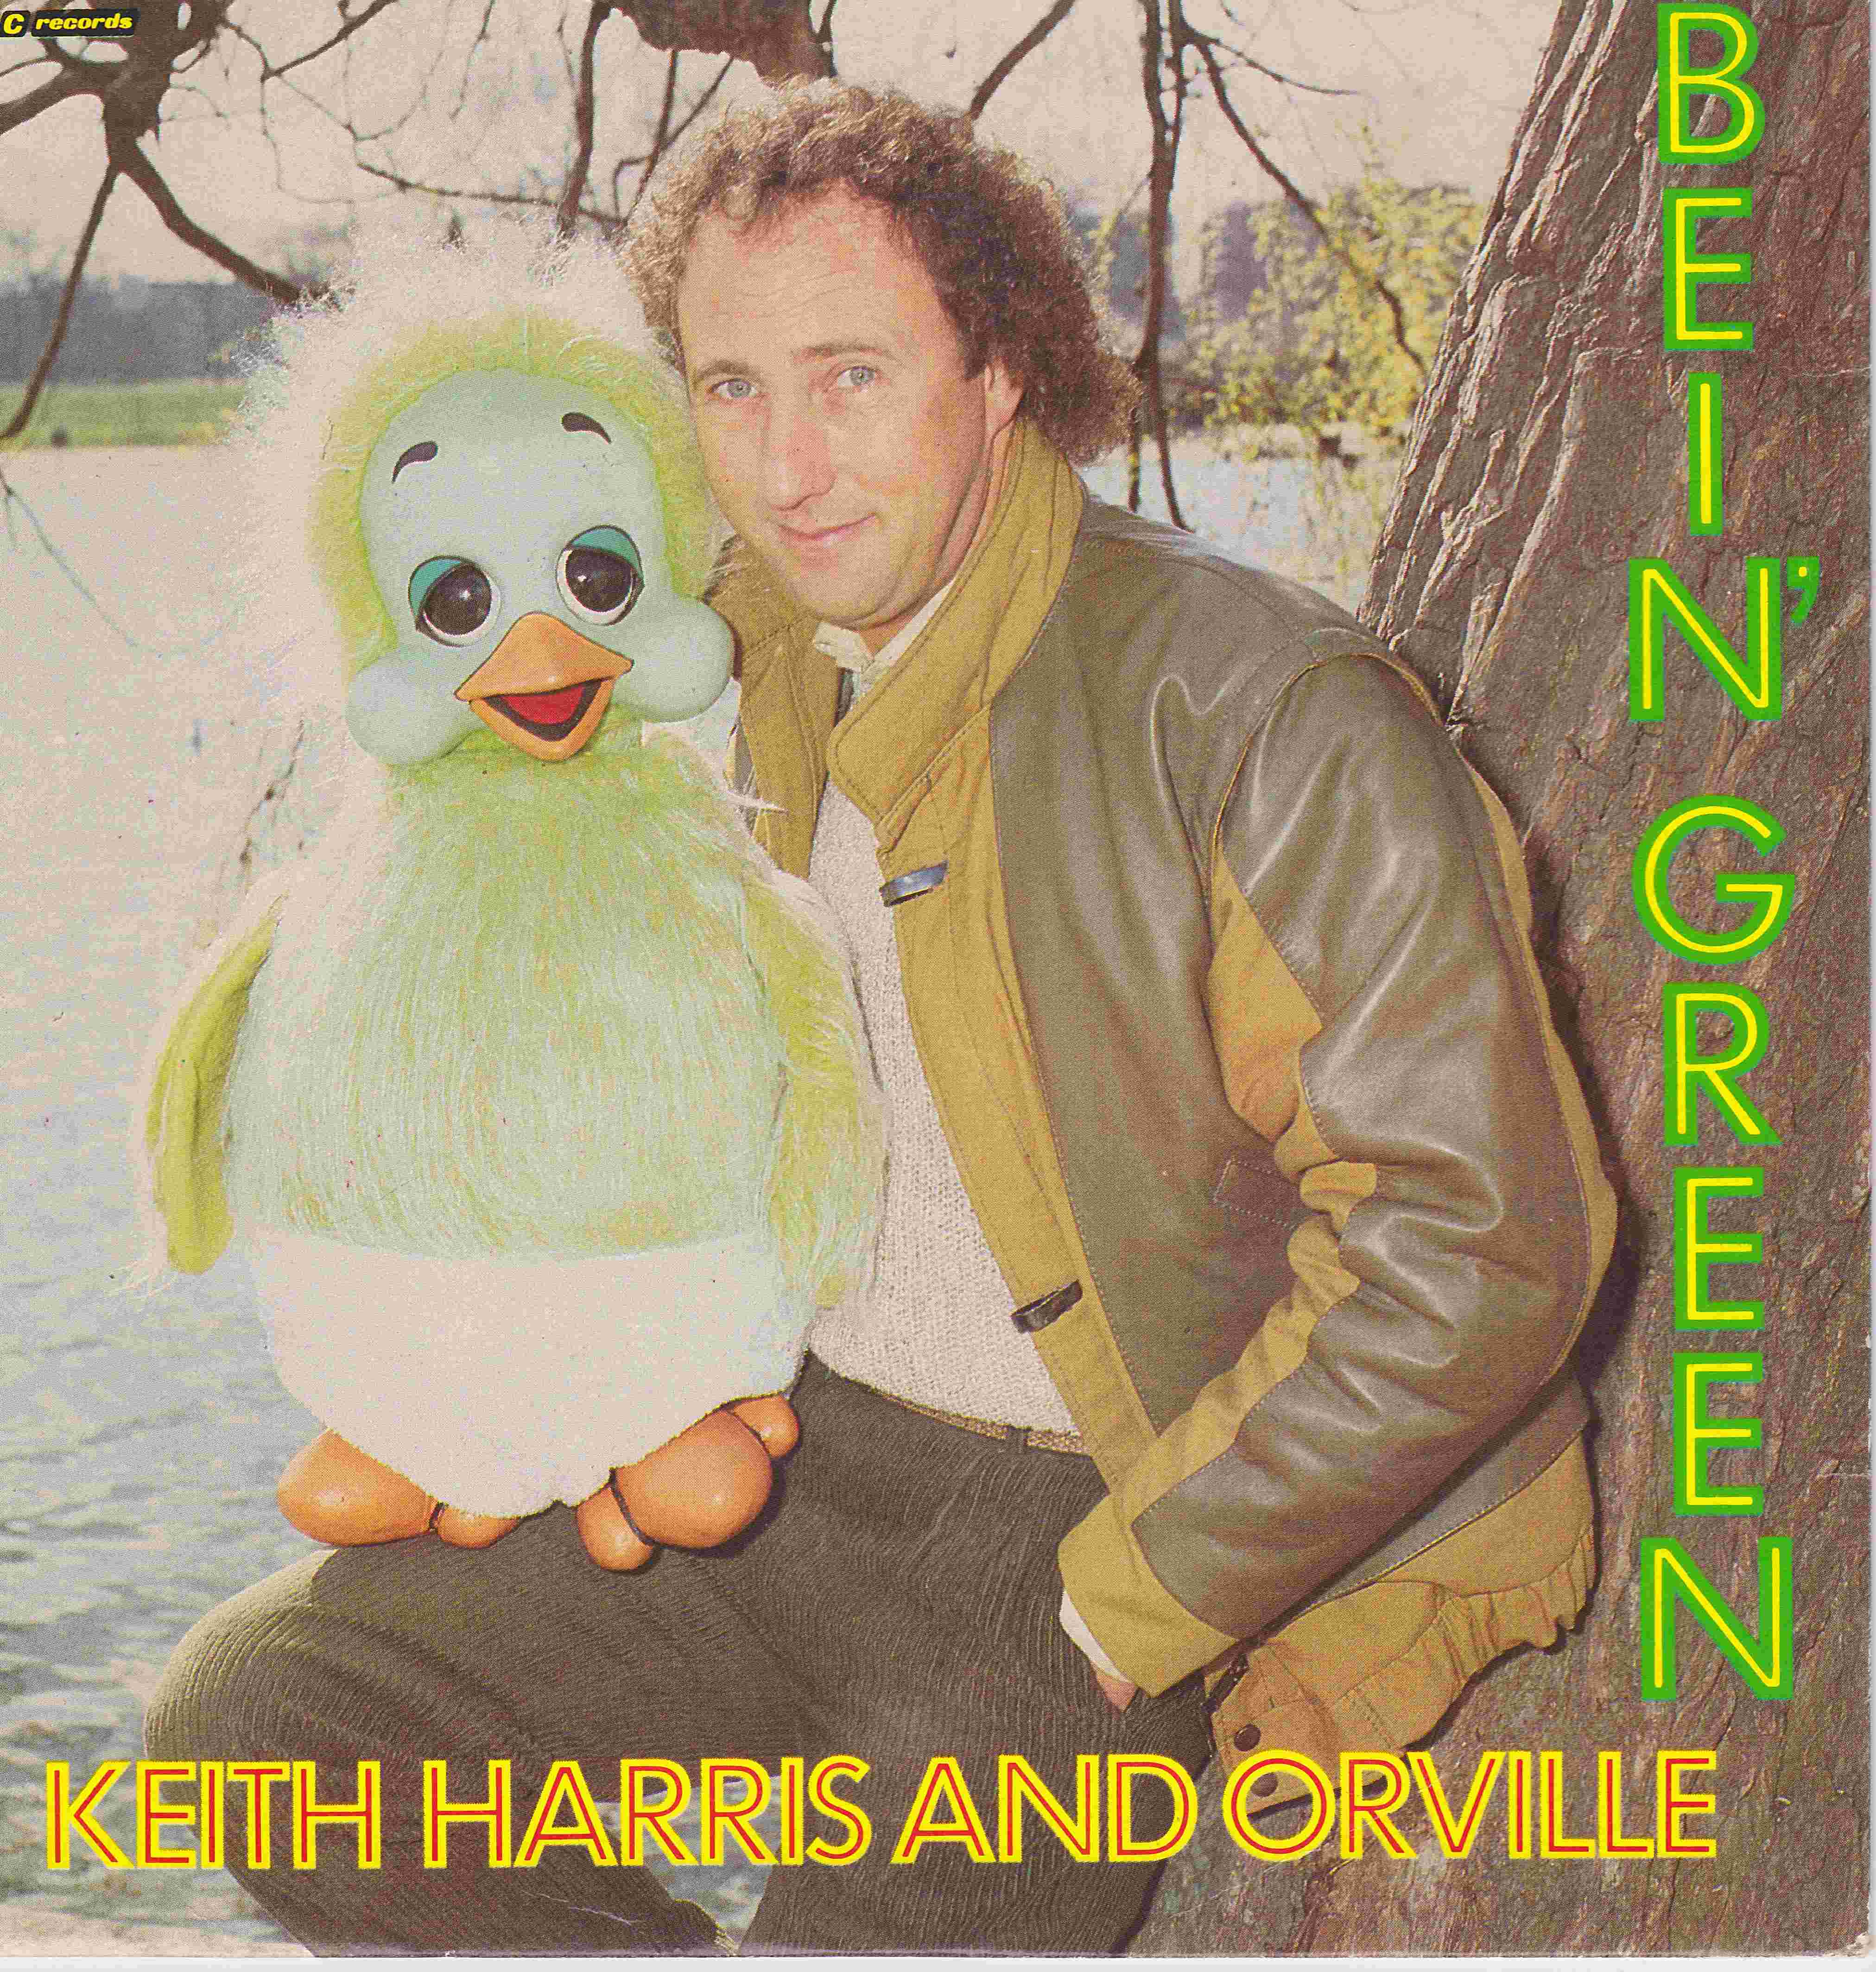 Picture of RESL 145 Bein' green by artist Keith Harris and Orville from the BBC records and Tapes library